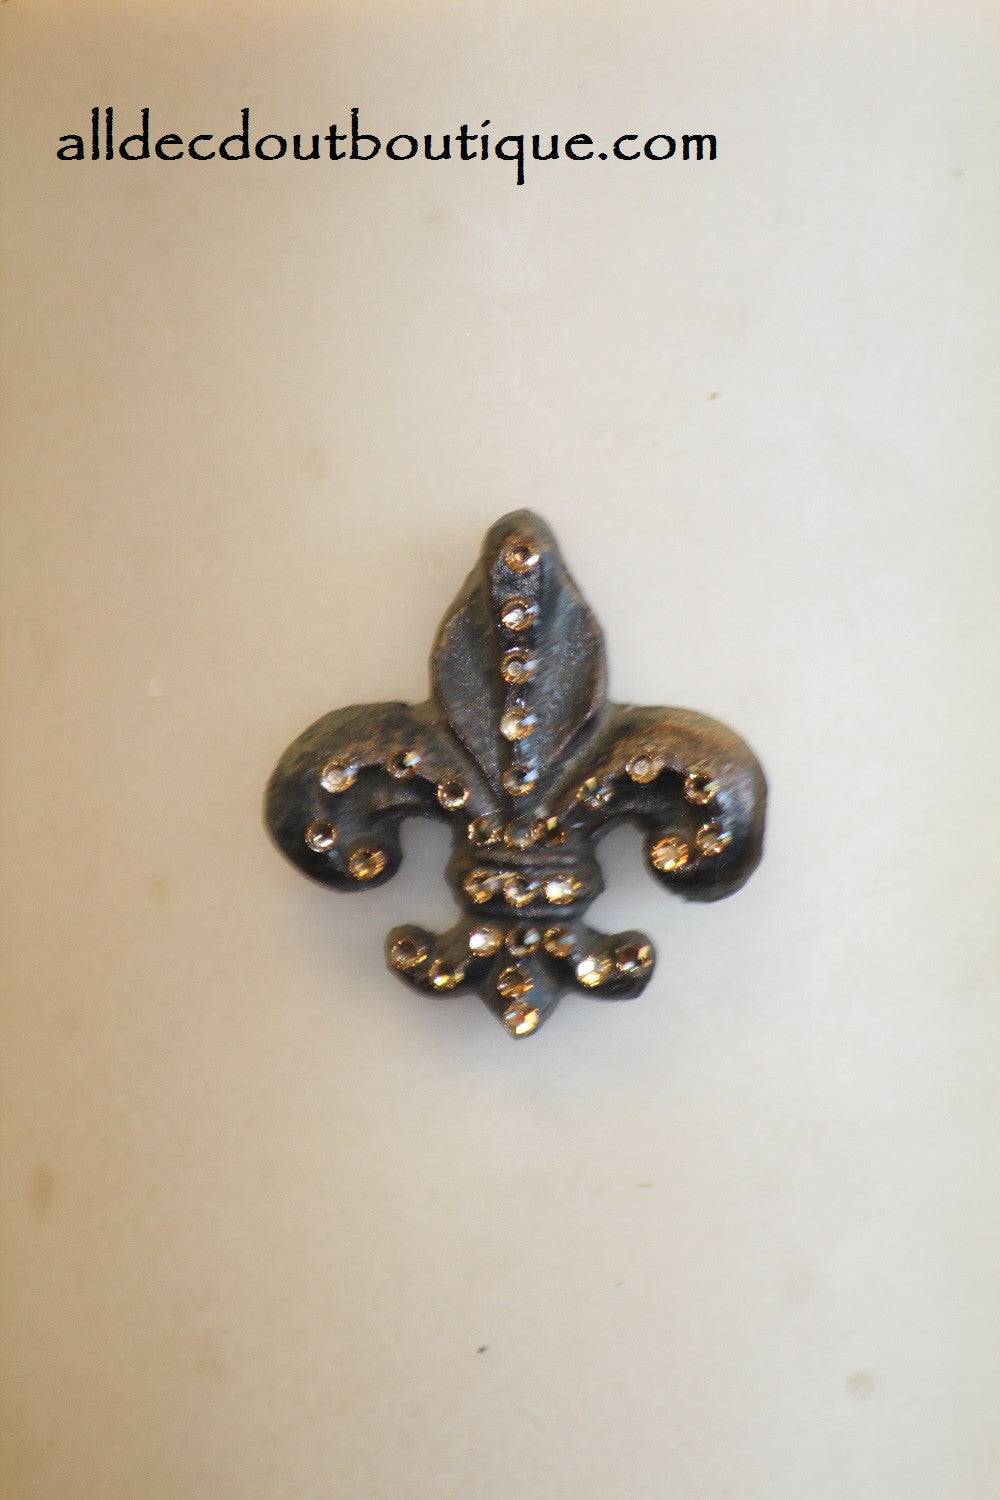 DECORATIVE CANDLE PIN EMBELLISHED | Topaz Crystals Small Fleur De Lis